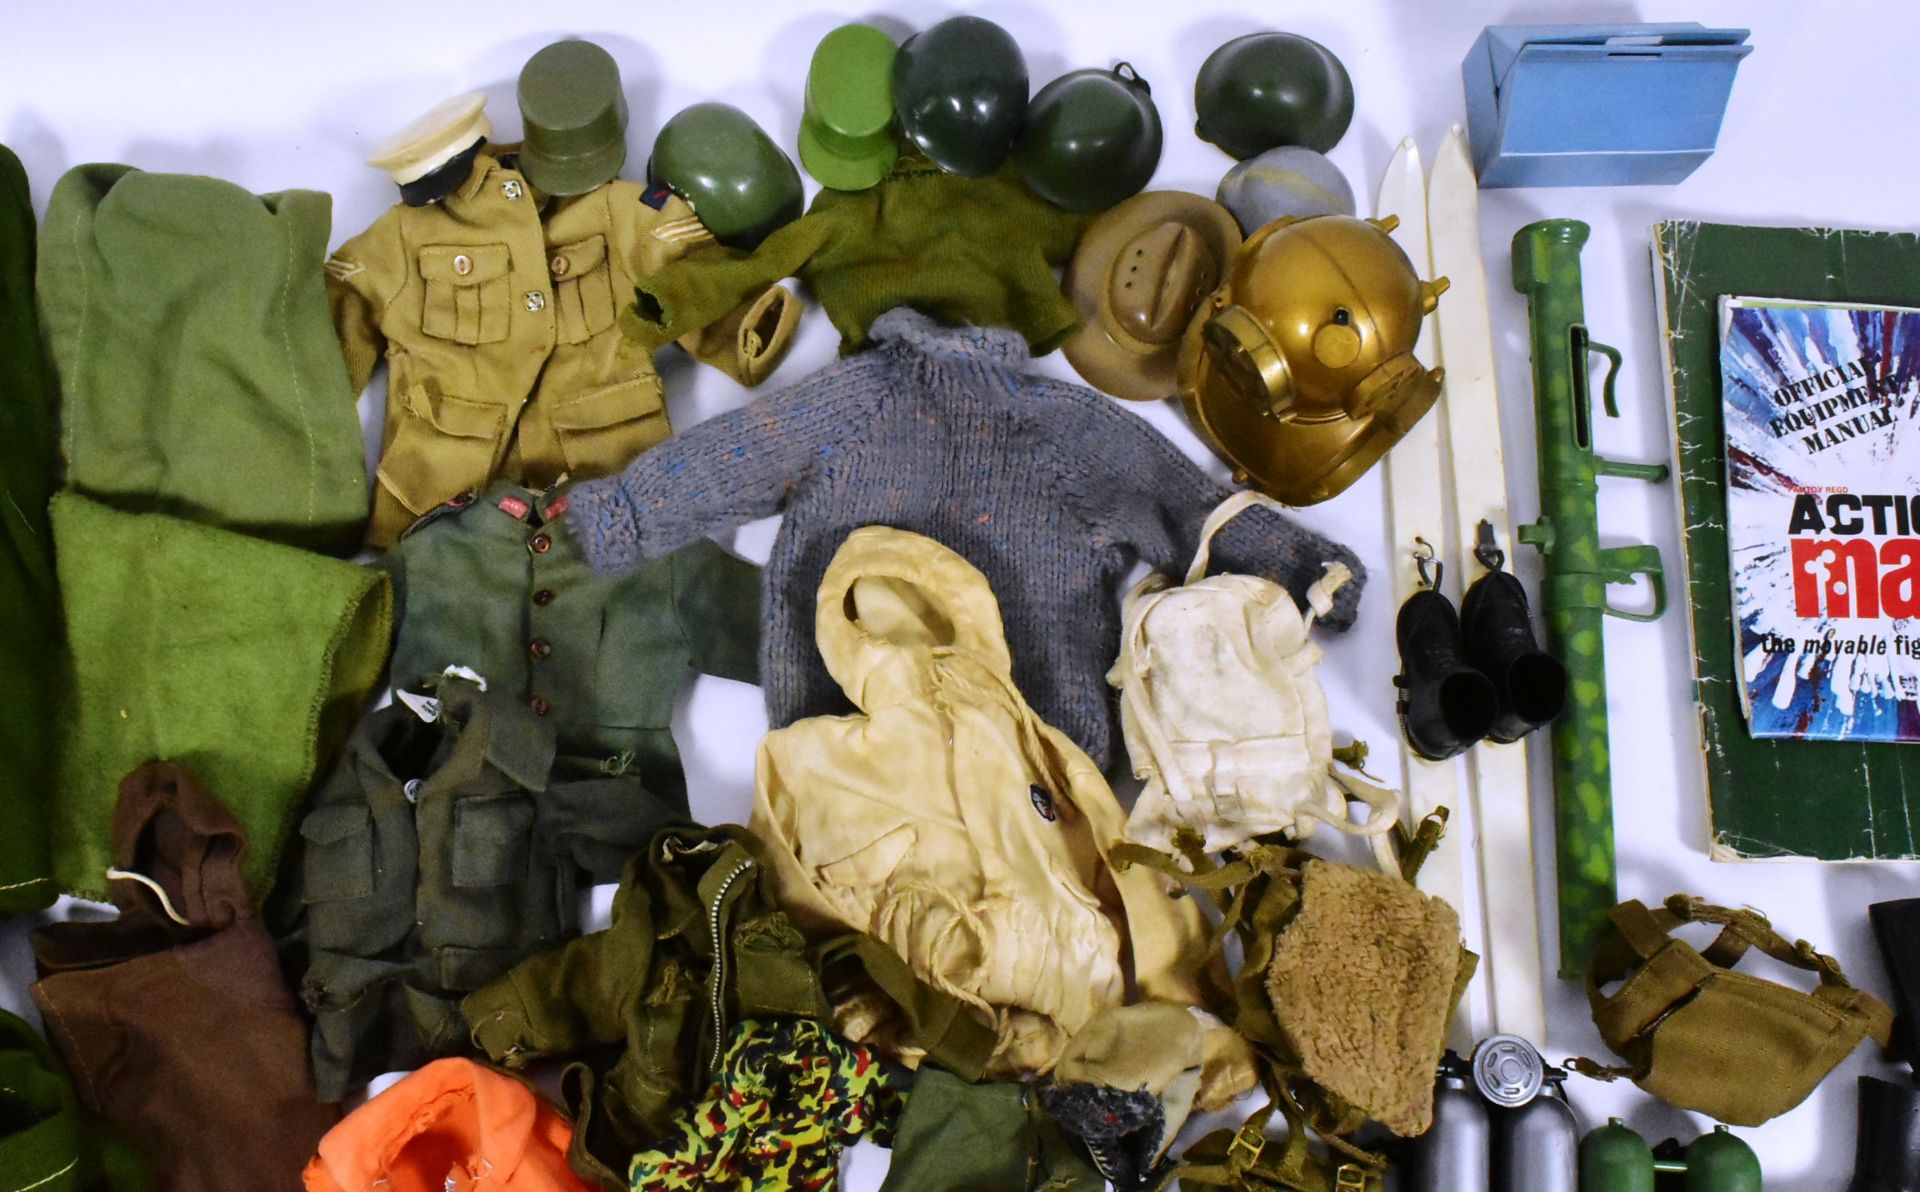 ACTION MAN - PALITOY - COLLECTION OF ACCESSORIES - Image 5 of 5